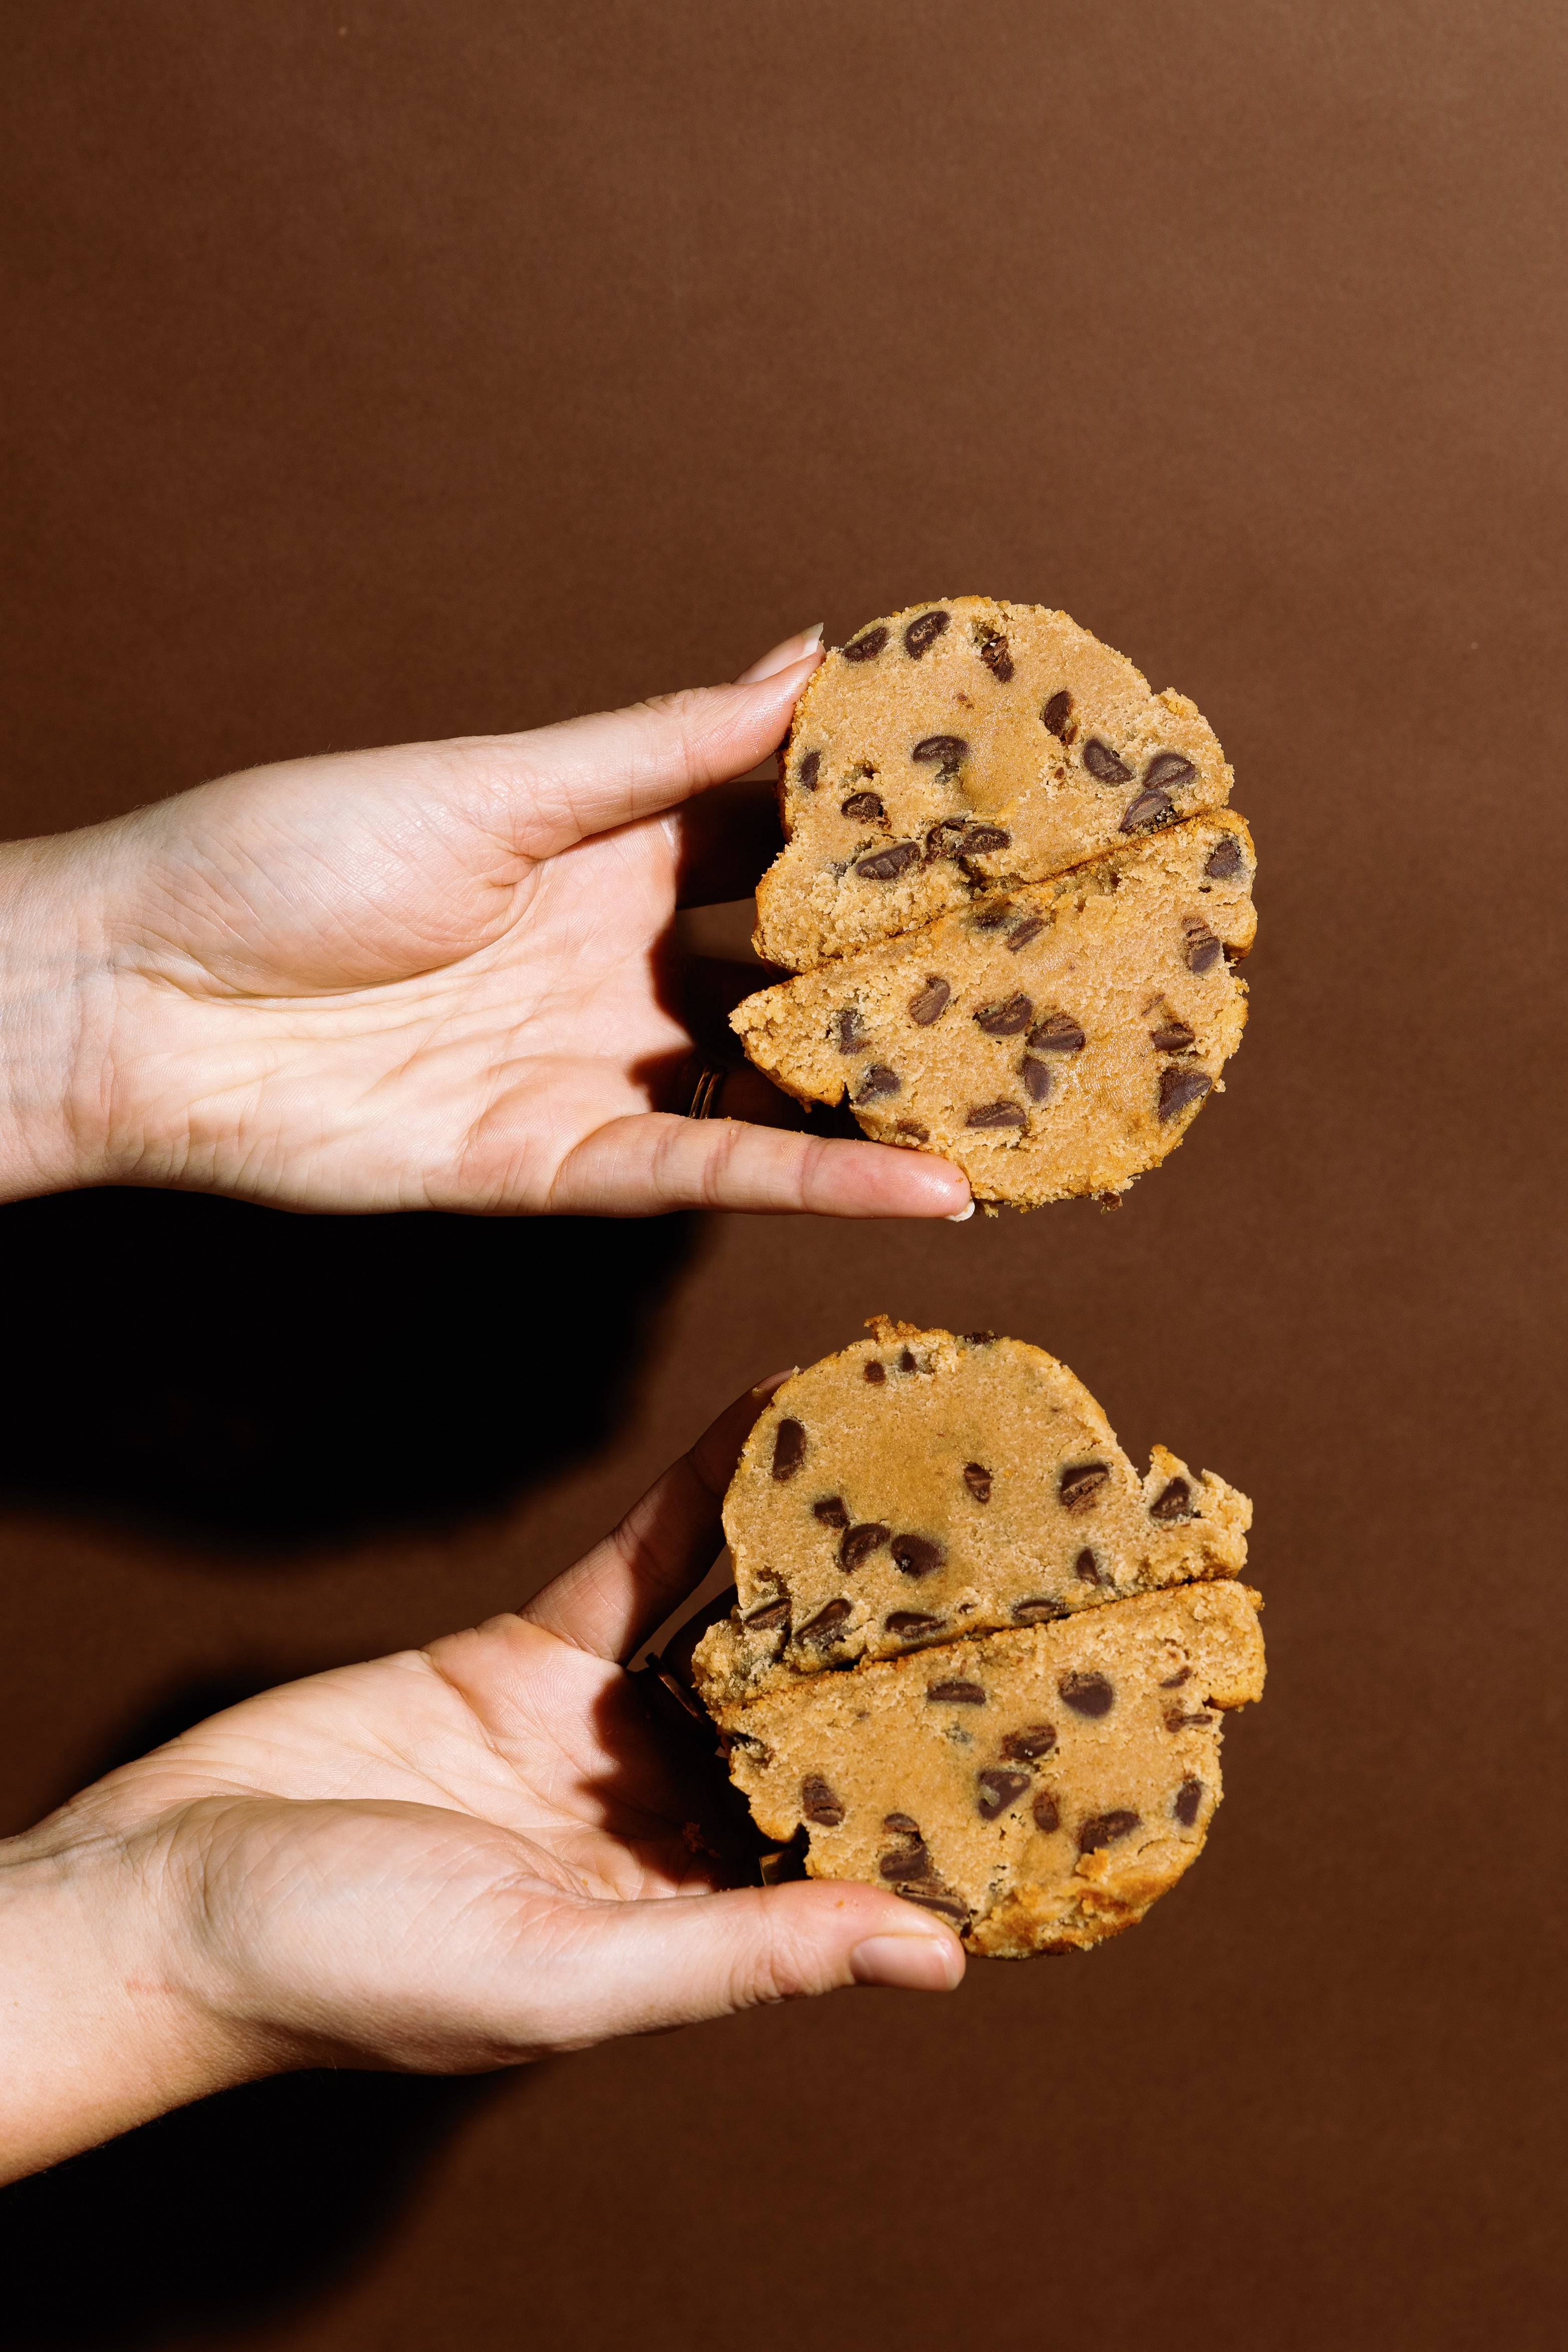 Two hands holding up half-pound cookies, showing the dense and delicious inside, filled with chocolate chips